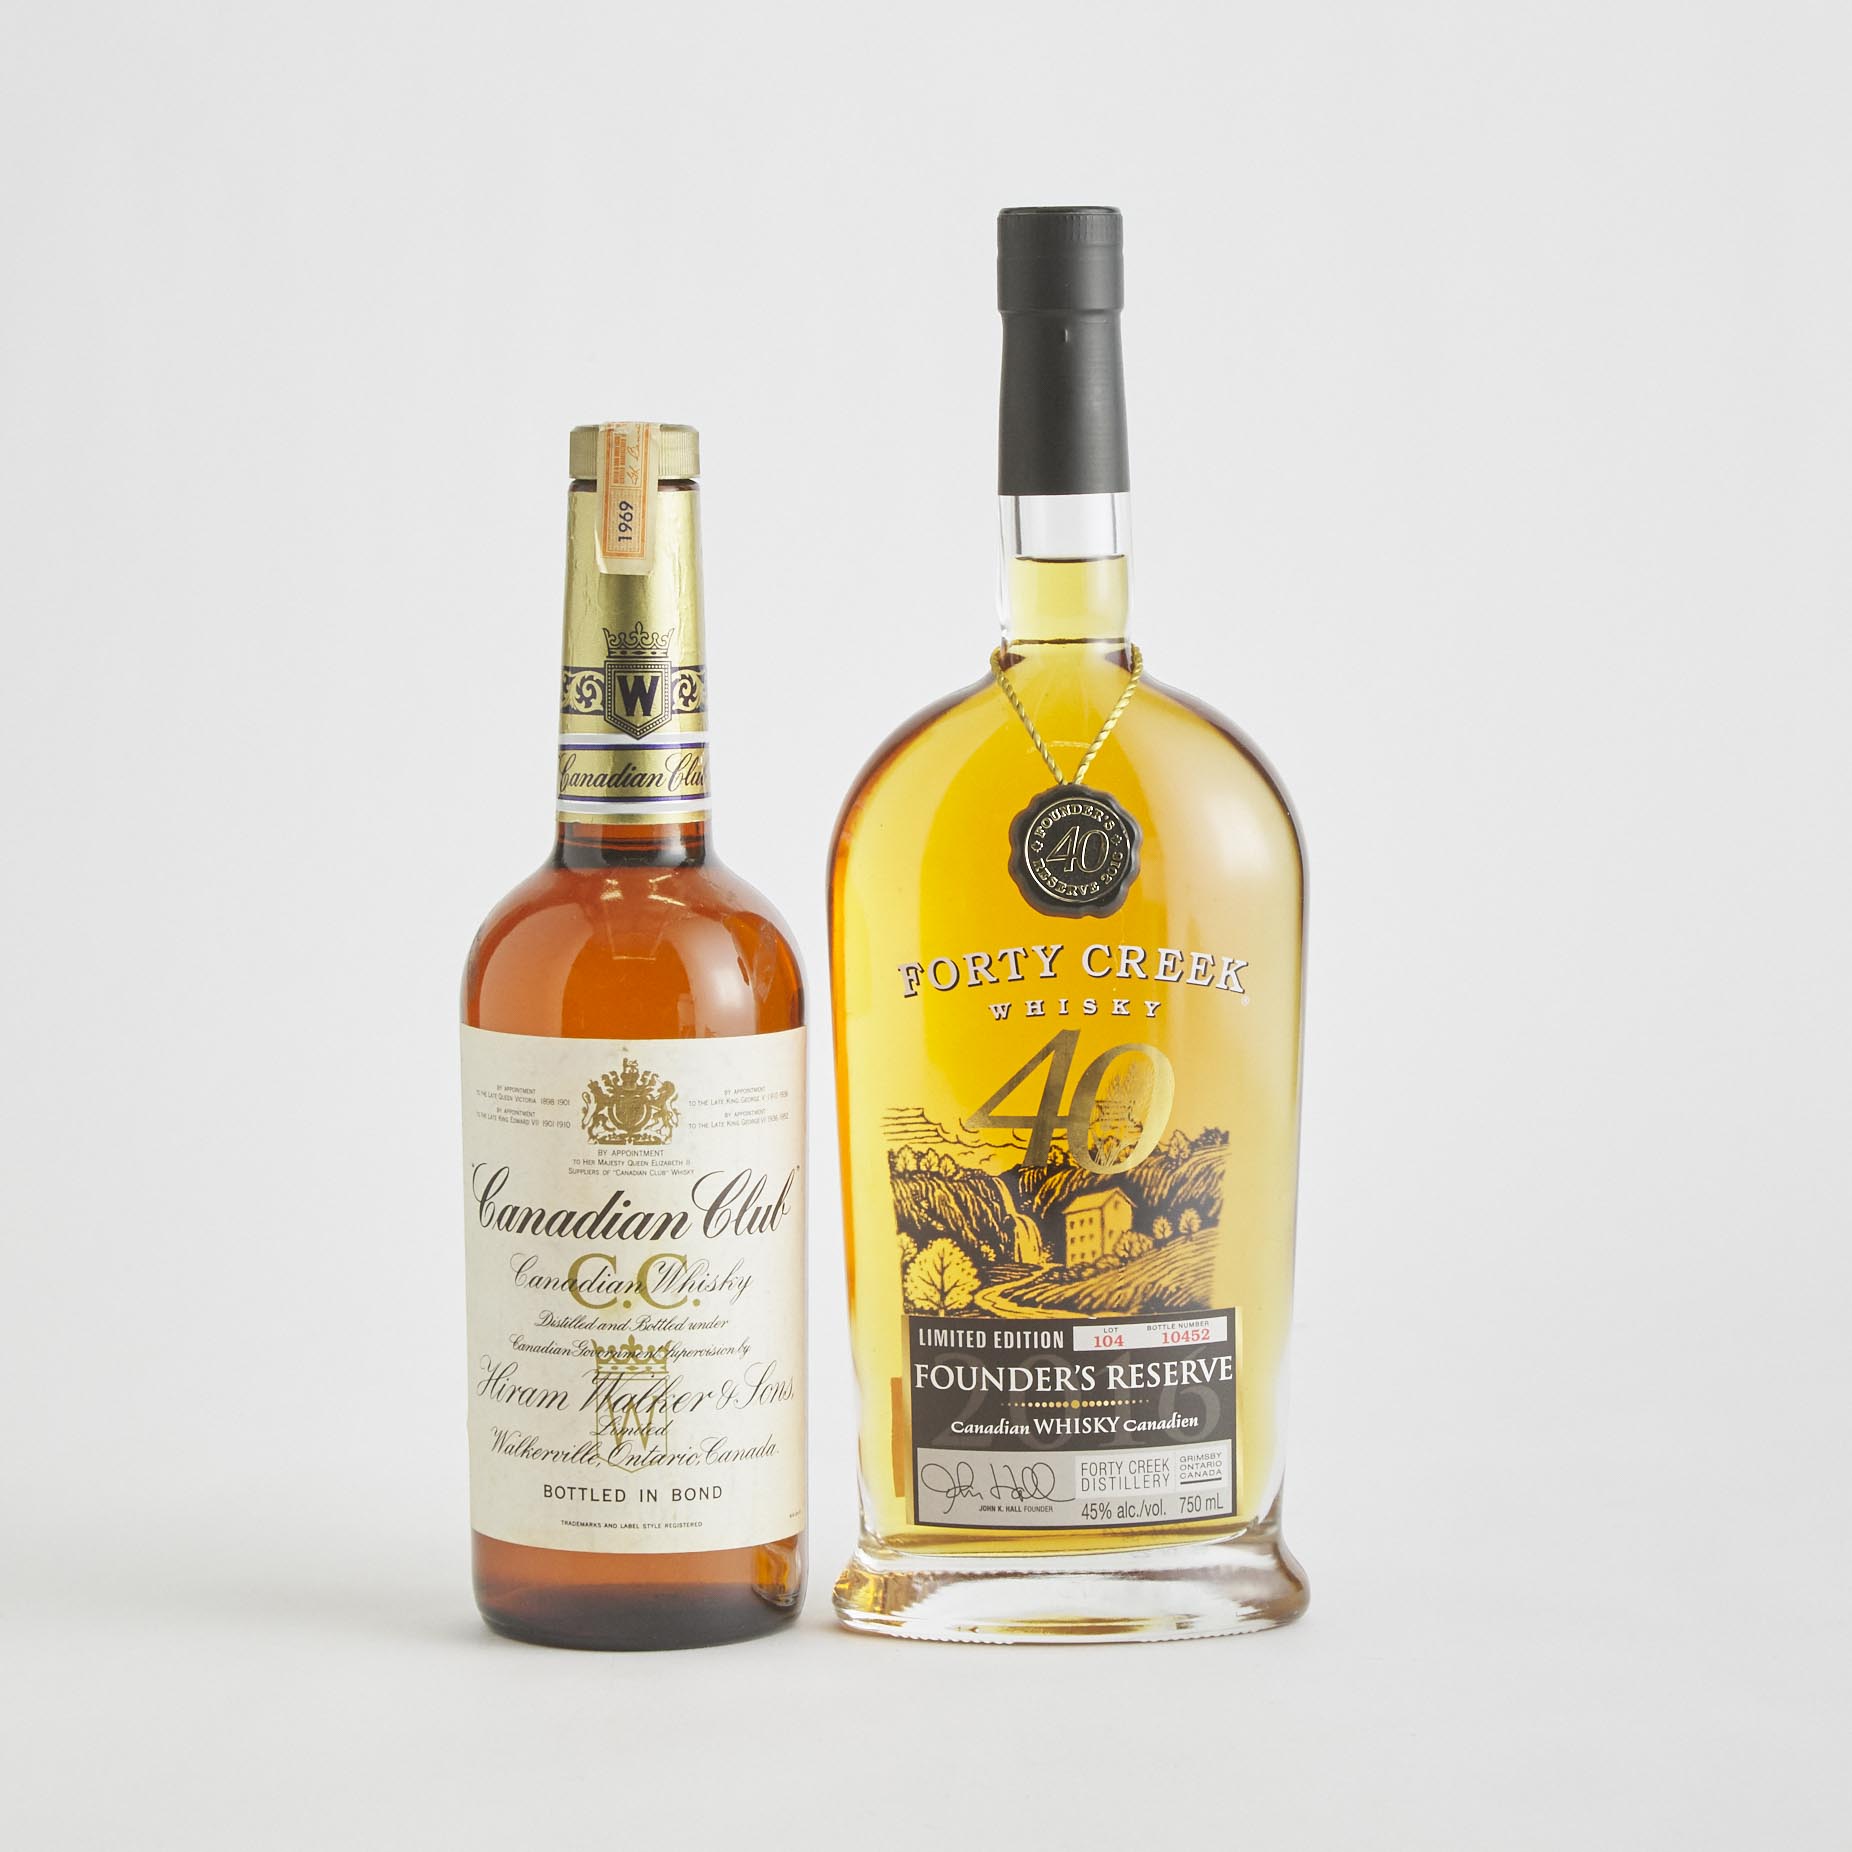 CANADIAN CLUB CANADIAN WHISKY (ONE 500 ?)
FORTY CREEK WHISKY (ONE 750 ML)